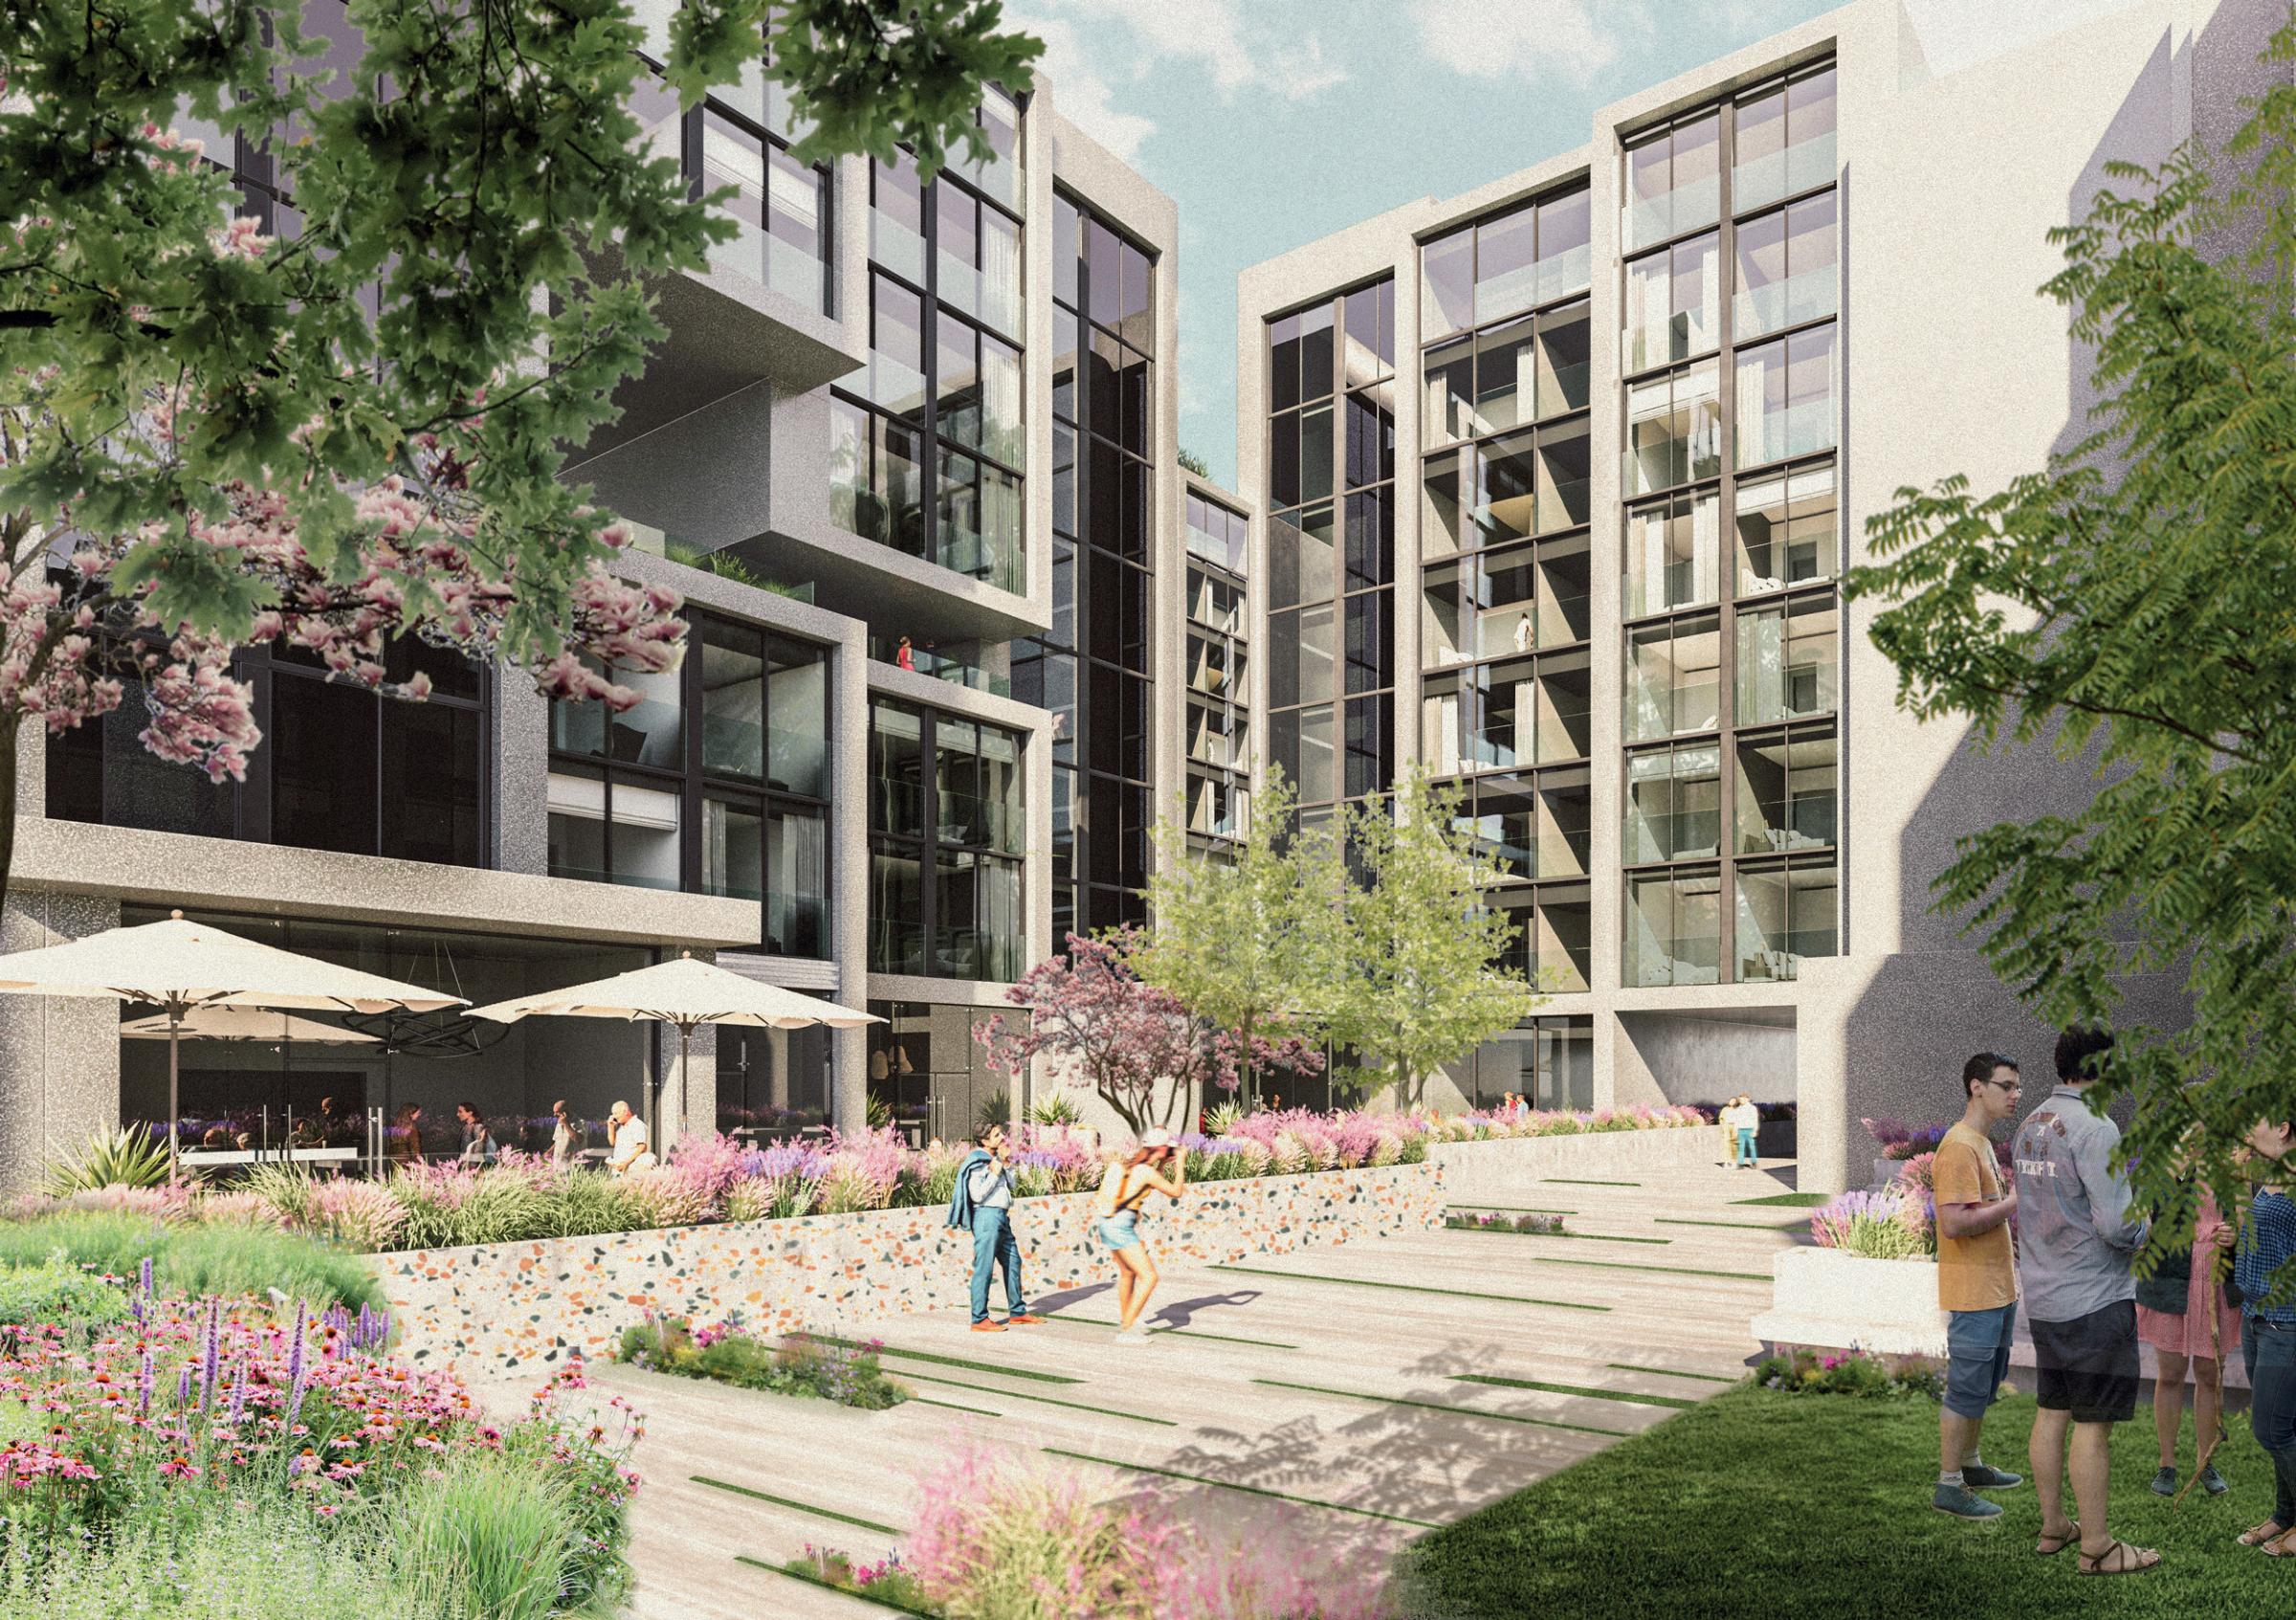 A CGI render of the proposed development at Narrowcliff